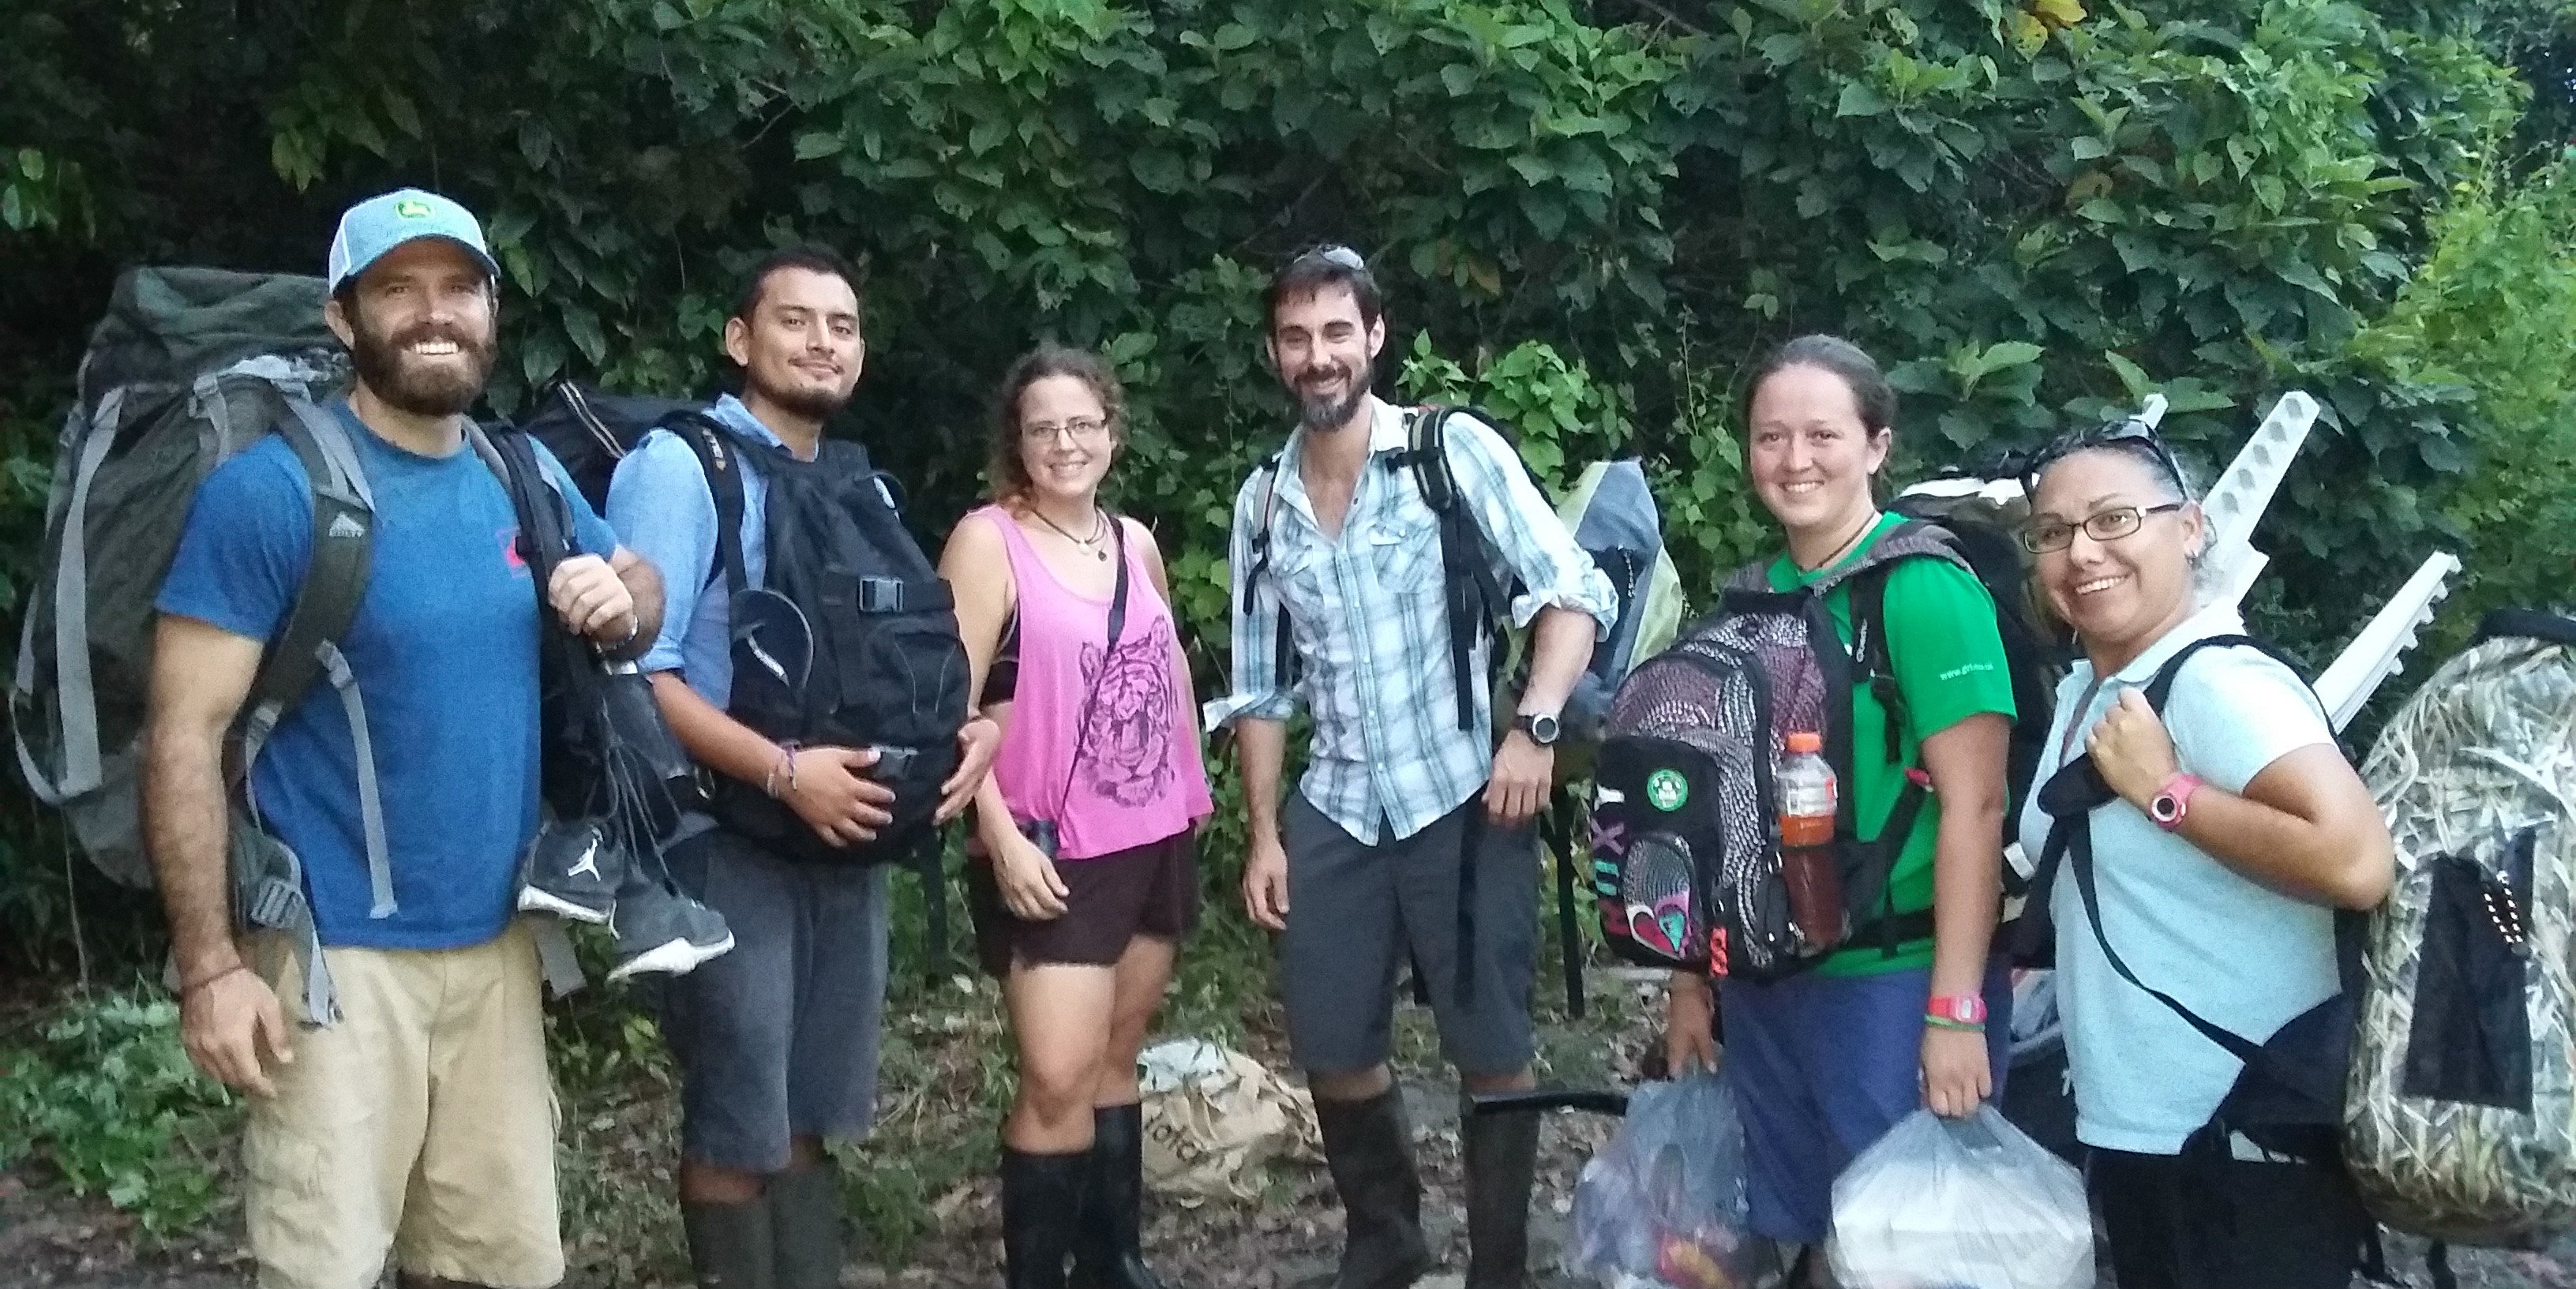 Participants prepare for to trek through the jungles of Jalova on a data collection trip. This science expedition makes our list of the best volunteer abroad programs for adults.